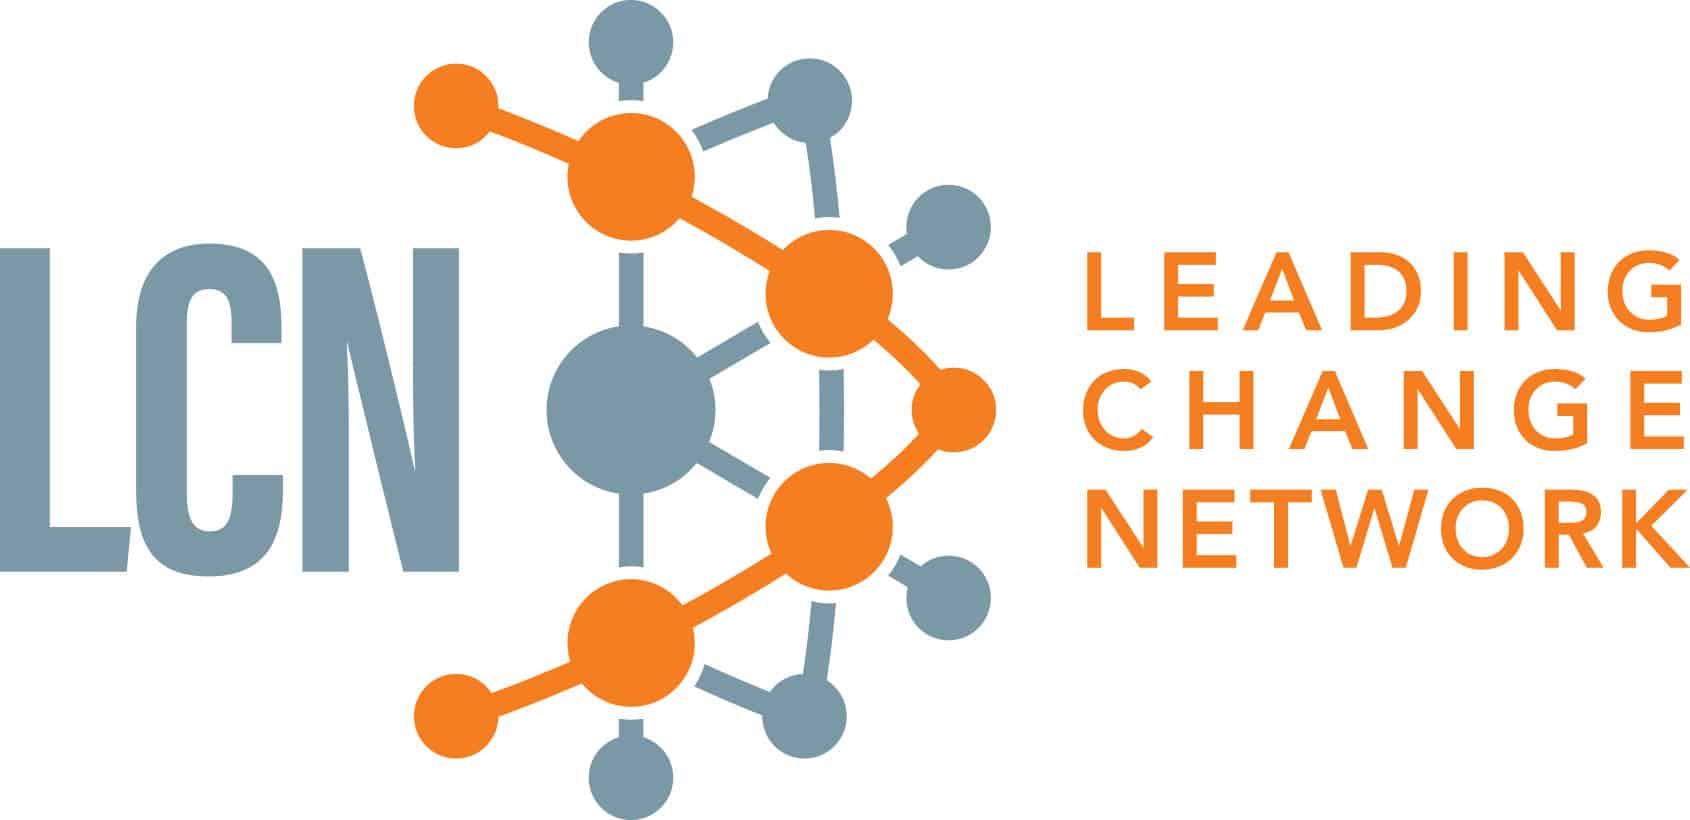 Network of Community Ministries (NETWORK) - Heads up: Network's